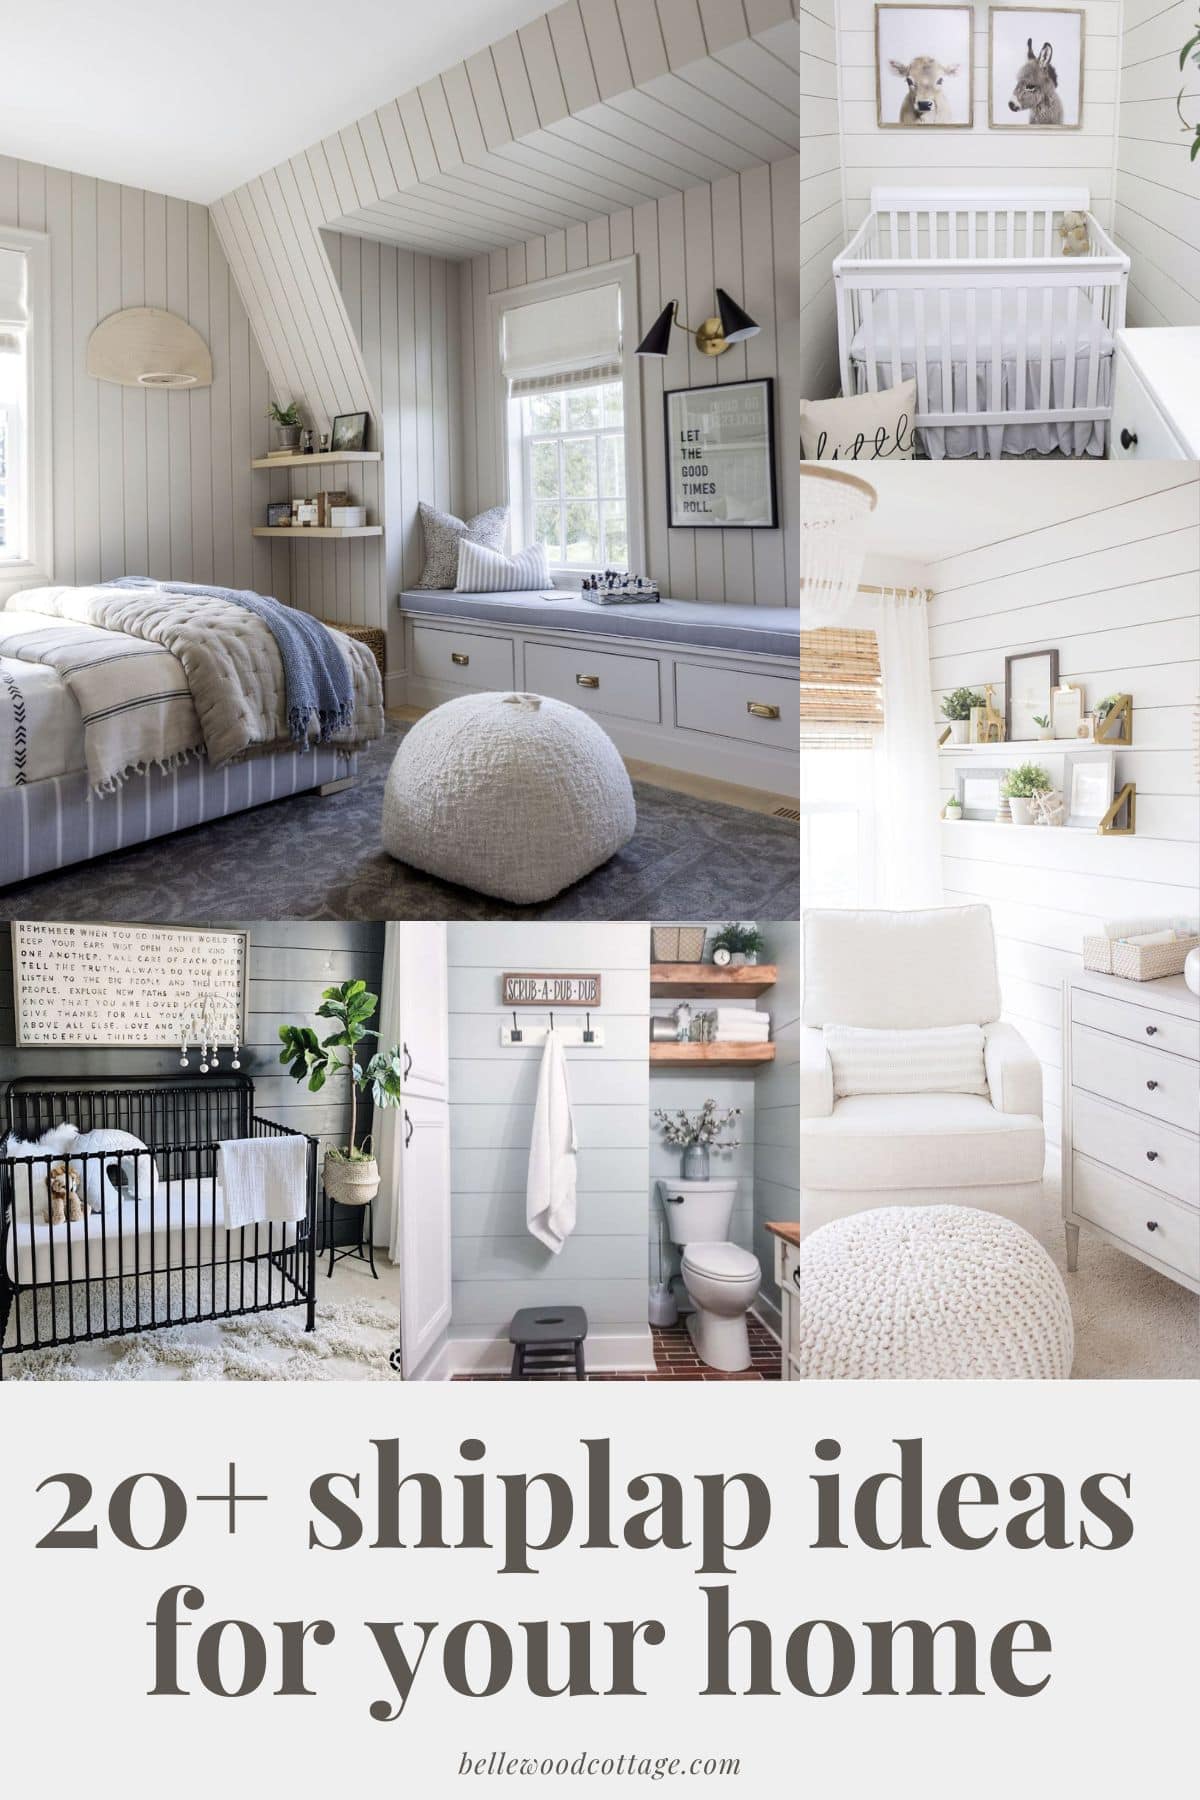 A collage of shiplap ideas from various homes with the words, "20+ Shiplap Ideas for Your Home"